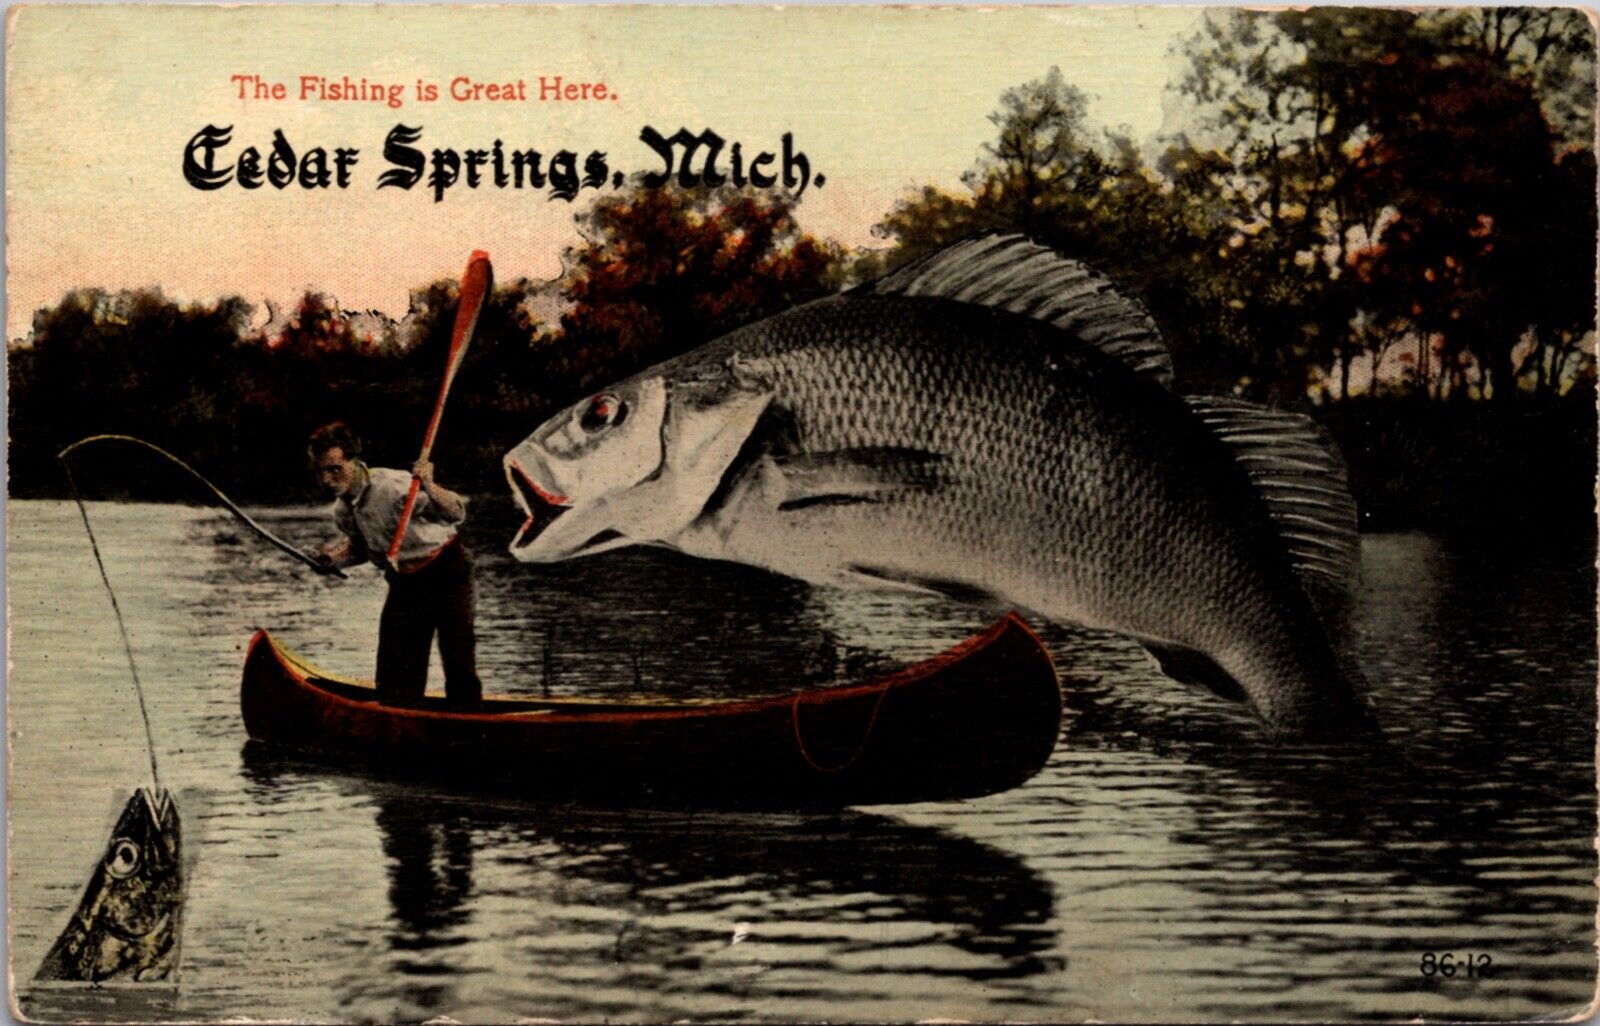 Exaggeration PC Giant Fish The Fishing is Great Here Cedar Springs, Michigan